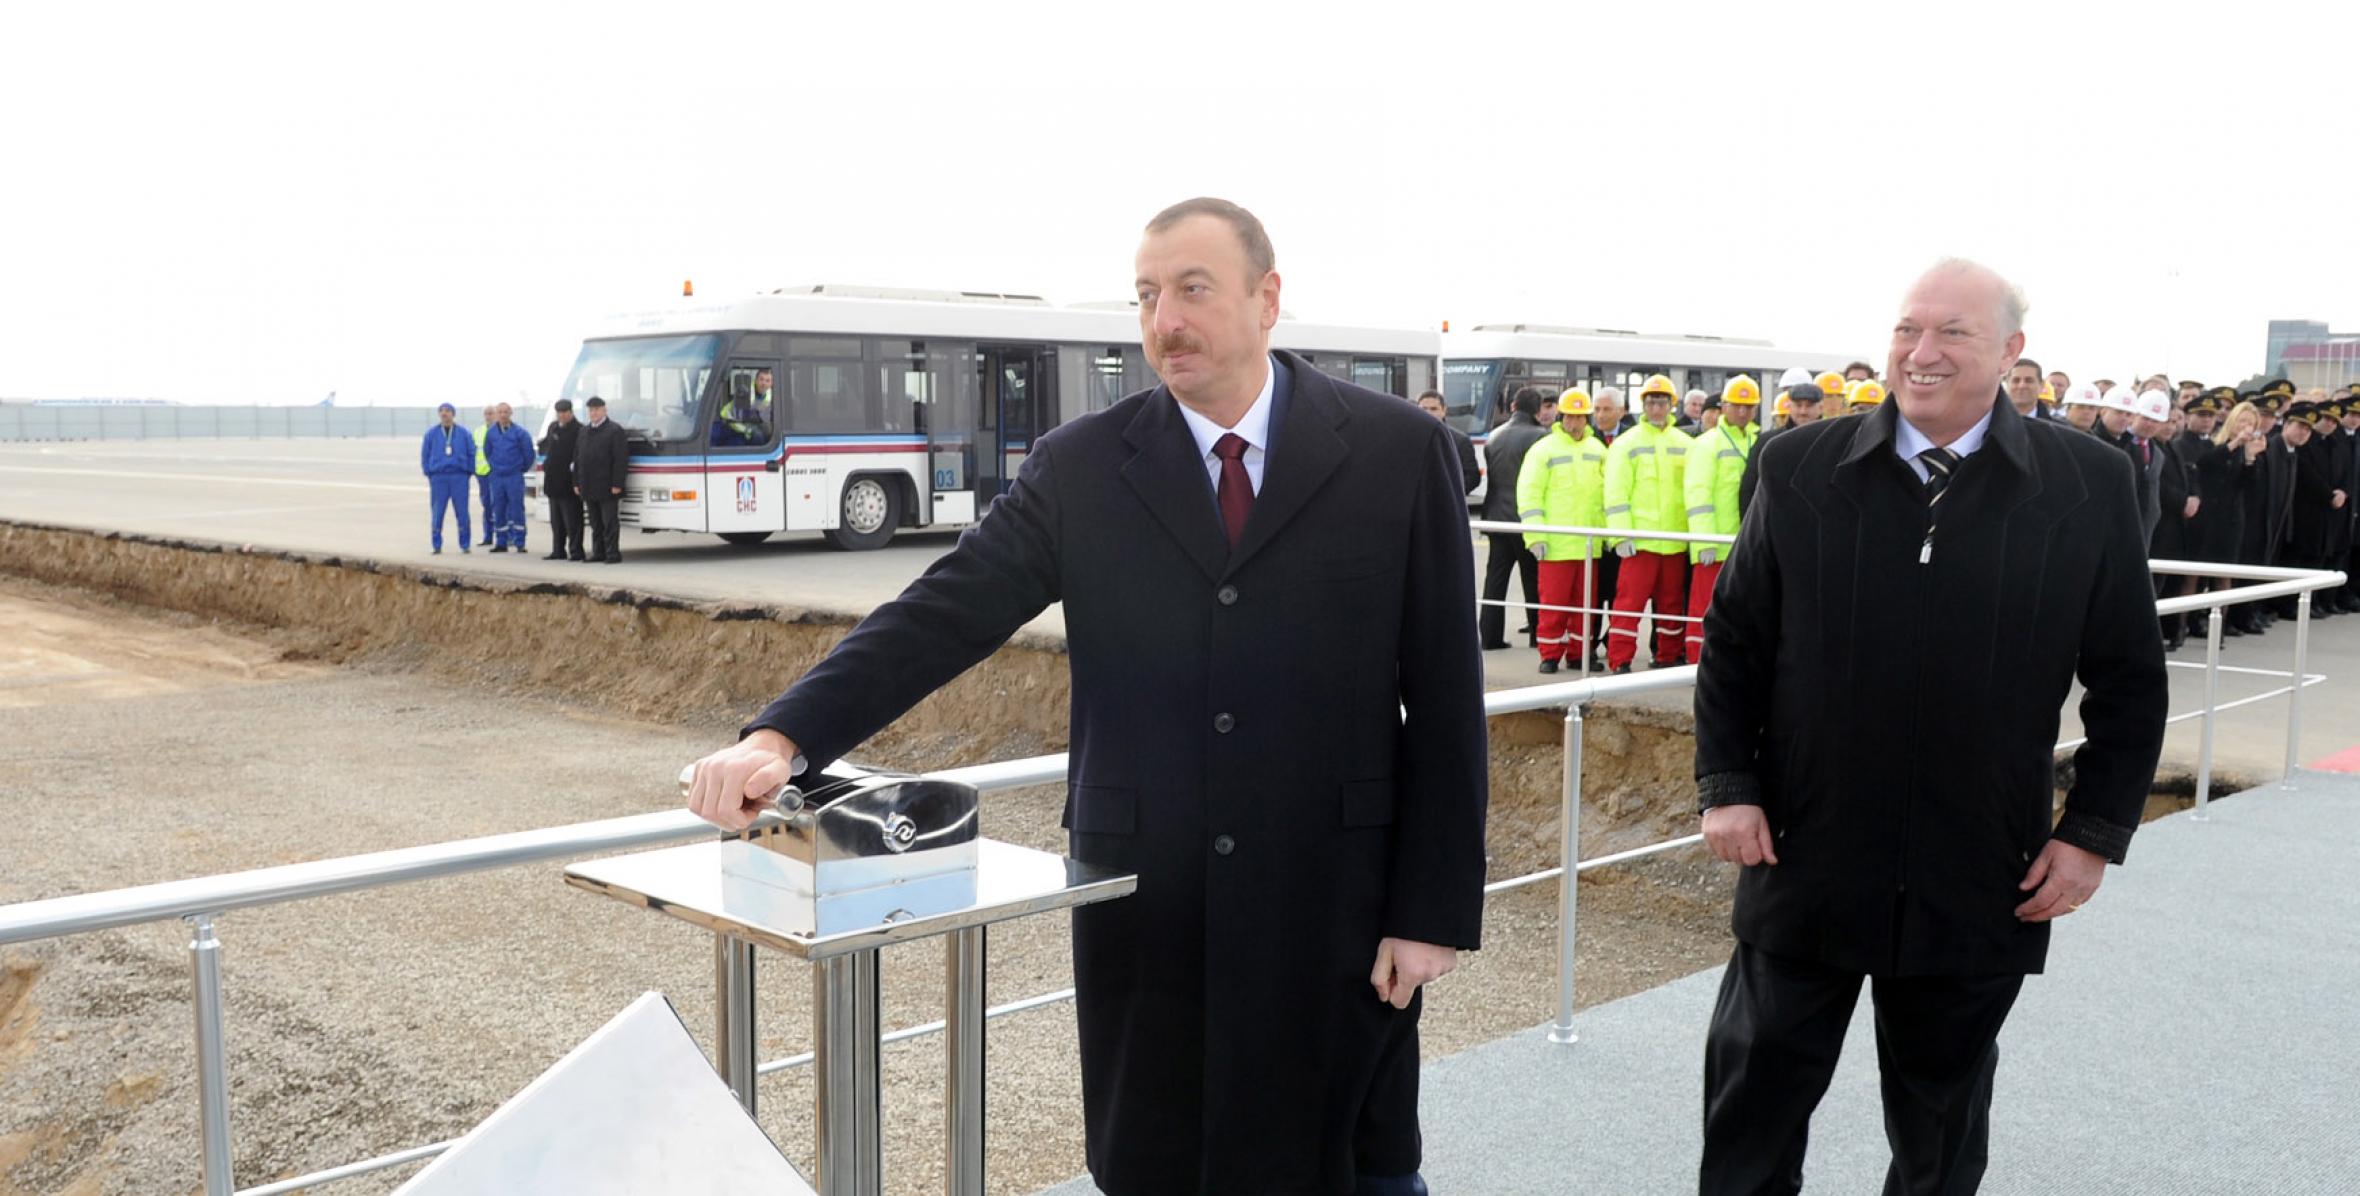 Ilham Aliyev participated at the groundbreaking ceremony of a new terminal building at the Heydar Aliyev International Airport